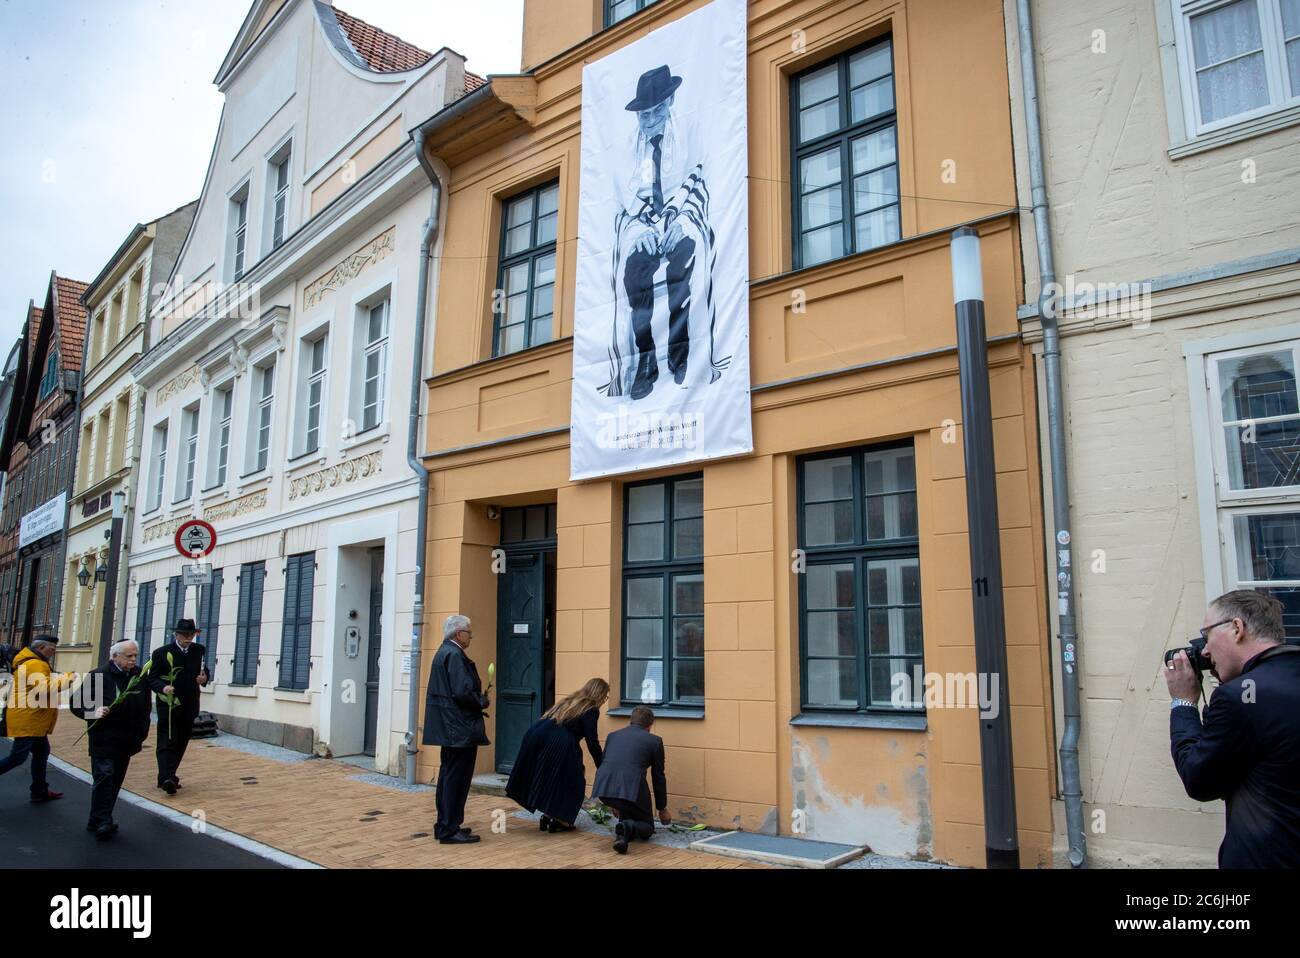 Schwerin, Germany. 10th July, 2020. About 150 people said their farewells to William Wolff, the long-time state rabbi in Mecklenburg-Western Pomerania, with a prayer service. In front of the Jewish Community building, where a picture of the rabbi by the photographer Koska was hung, mourners laid flowers. Wolff had died in England on 08.07.2020 at the age of 93. Credit: Jens Büttner/dpa-Zentralbild/dpa/Alamy Live News Stock Photo